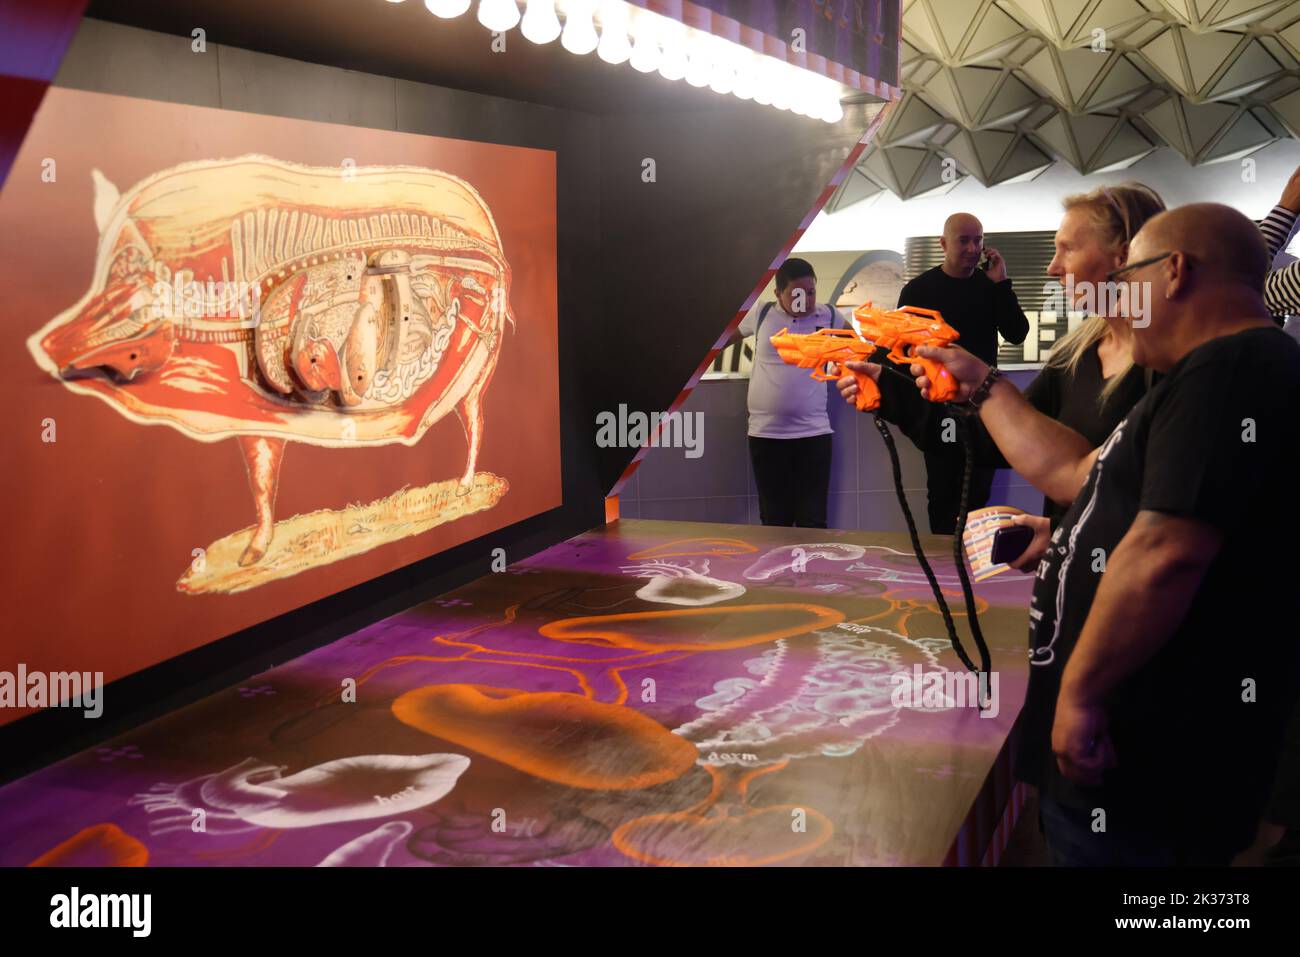 People shooting at image of pig anatomy, exhibited at the Retrofuture expo in the Evoluon Stock Photo